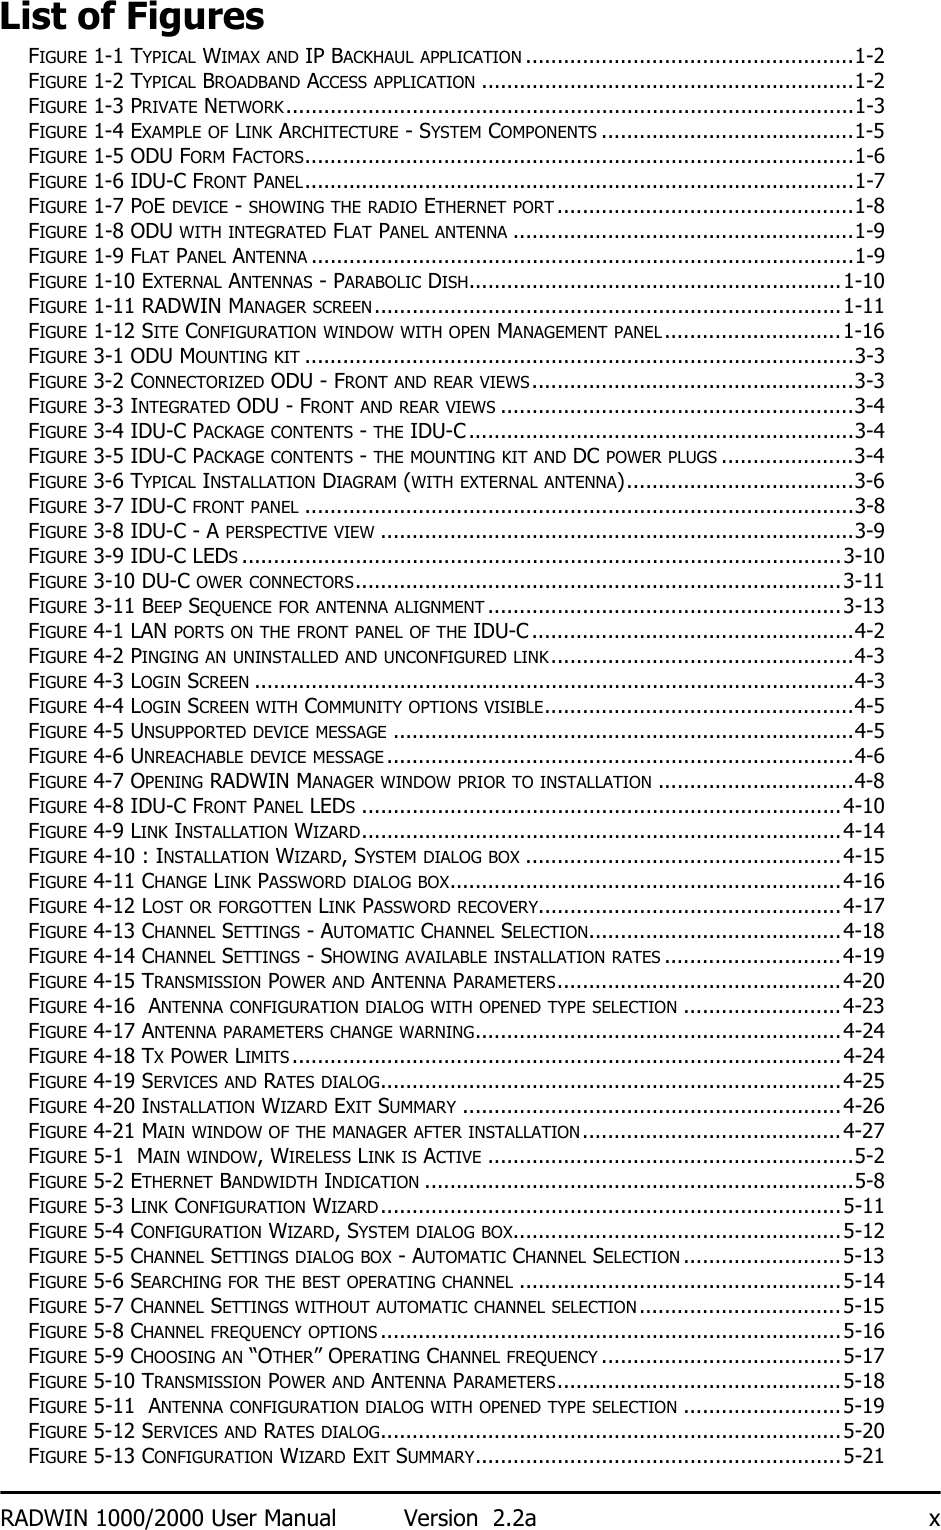 RADWIN 1000/2000 User Manual Version  2.2a xList of FiguresFIGURE 1-1 TYPICAL WIMAX AND IP BACKHAUL APPLICATION ....................................................1-2FIGURE 1-2 TYPICAL BROADBAND ACCESS APPLICATION ...........................................................1-2FIGURE 1-3 PRIVATE NETWORK..........................................................................................1-3FIGURE 1-4 EXAMPLE OF LINK ARCHITECTURE - SYSTEM COMPONENTS ........................................1-5FIGURE 1-5 ODU FORM FACTORS.......................................................................................1-6FIGURE 1-6 IDU-C FRONT PANEL.......................................................................................1-7FIGURE 1-7 POE DEVICE - SHOWING THE RADIO ETHERNET PORT ...............................................1-8FIGURE 1-8 ODU WITH INTEGRATED FLAT PANEL ANTENNA ......................................................1-9FIGURE 1-9 FLAT PANEL ANTENNA ......................................................................................1-9FIGURE 1-10 EXTERNAL ANTENNAS - PARABOLIC DISH...........................................................1-10FIGURE 1-11 RADWIN MANAGER SCREEN..........................................................................1-11FIGURE 1-12 SITE CONFIGURATION WINDOW WITH OPEN MANAGEMENT PANEL............................1-16FIGURE 3-1 ODU MOUNTING KIT .......................................................................................3-3FIGURE 3-2 CONNECTORIZED ODU - FRONT AND REAR VIEWS...................................................3-3FIGURE 3-3 INTEGRATED ODU - FRONT AND REAR VIEWS ........................................................3-4FIGURE 3-4 IDU-C PACKAGE CONTENTS - THE IDU-C .............................................................3-4FIGURE 3-5 IDU-C PACKAGE CONTENTS - THE MOUNTING KIT AND DC POWER PLUGS .....................3-4FIGURE 3-6 TYPICAL INSTALLATION DIAGRAM (WITH EXTERNAL ANTENNA)....................................3-6FIGURE 3-7 IDU-C FRONT PANEL .......................................................................................3-8FIGURE 3-8 IDU-C - A PERSPECTIVE VIEW ...........................................................................3-9FIGURE 3-9 IDU-C LEDS...............................................................................................3-10FIGURE 3-10 DU-C OWER CONNECTORS.............................................................................3-11FIGURE 3-11 BEEP SEQUENCE FOR ANTENNA ALIGNMENT ........................................................3-13FIGURE 4-1 LAN PORTS ON THE FRONT PANEL OF THE IDU-C ...................................................4-2FIGURE 4-2 PINGING AN UNINSTALLED AND UNCONFIGURED LINK................................................4-3FIGURE 4-3 LOGIN SCREEN ...............................................................................................4-3FIGURE 4-4 LOGIN SCREEN WITH COMMUNITY OPTIONS VISIBLE.................................................4-5FIGURE 4-5 UNSUPPORTED DEVICE MESSAGE .........................................................................4-5FIGURE 4-6 UNREACHABLE DEVICE MESSAGE ..........................................................................4-6FIGURE 4-7 OPENING RADWIN MANAGER WINDOW PRIOR TO INSTALLATION ...............................4-8FIGURE 4-8 IDU-C FRONT PANEL LEDS............................................................................4-10FIGURE 4-9 LINK INSTALLATION WIZARD............................................................................4-14FIGURE 4-10 : INSTALLATION WIZARD, SYSTEM DIALOG BOX ..................................................4-15FIGURE 4-11 CHANGE LINK PASSWORD DIALOG BOX..............................................................4-16FIGURE 4-12 LOST OR FORGOTTEN LINK PASSWORD RECOVERY................................................4-17FIGURE 4-13 CHANNEL SETTINGS - AUTOMATIC CHANNEL SELECTION........................................4-18FIGURE 4-14 CHANNEL SETTINGS - SHOWING AVAILABLE INSTALLATION RATES ............................4-19FIGURE 4-15 TRANSMISSION POWER AND ANTENNA PARAMETERS.............................................4-20FIGURE 4-16  ANTENNA CONFIGURATION DIALOG WITH OPENED TYPE SELECTION .........................4-23FIGURE 4-17 ANTENNA PARAMETERS CHANGE WARNING..........................................................4-24FIGURE 4-18 TX POWER LIMITS .......................................................................................4-24FIGURE 4-19 SERVICES AND RATES DIALOG.........................................................................4-25FIGURE 4-20 INSTALLATION WIZARD EXIT SUMMARY ............................................................4-26FIGURE 4-21 MAIN WINDOW OF THE MANAGER AFTER INSTALLATION.........................................4-27FIGURE 5-1  MAIN WINDOW, WIRELESS LINK IS ACTIVE ..........................................................5-2FIGURE 5-2 ETHERNET BANDWIDTH INDICATION ....................................................................5-8FIGURE 5-3 LINK CONFIGURATION WIZARD.........................................................................5-11FIGURE 5-4 CONFIGURATION WIZARD, SYSTEM DIALOG BOX....................................................5-12FIGURE 5-5 CHANNEL SETTINGS DIALOG BOX - AUTOMATIC CHANNEL SELECTION .........................5-13FIGURE 5-6 SEARCHING FOR THE BEST OPERATING CHANNEL ...................................................5-14FIGURE 5-7 CHANNEL SETTINGS WITHOUT AUTOMATIC CHANNEL SELECTION................................5-15FIGURE 5-8 CHANNEL FREQUENCY OPTIONS .........................................................................5-16FIGURE 5-9 CHOOSING AN “OTHER” OPERATING CHANNEL FREQUENCY ......................................5-17FIGURE 5-10 TRANSMISSION POWER AND ANTENNA PARAMETERS.............................................5-18FIGURE 5-11  ANTENNA CONFIGURATION DIALOG WITH OPENED TYPE SELECTION .........................5-19FIGURE 5-12 SERVICES AND RATES DIALOG.........................................................................5-20FIGURE 5-13 CONFIGURATION WIZARD EXIT SUMMARY..........................................................5-21